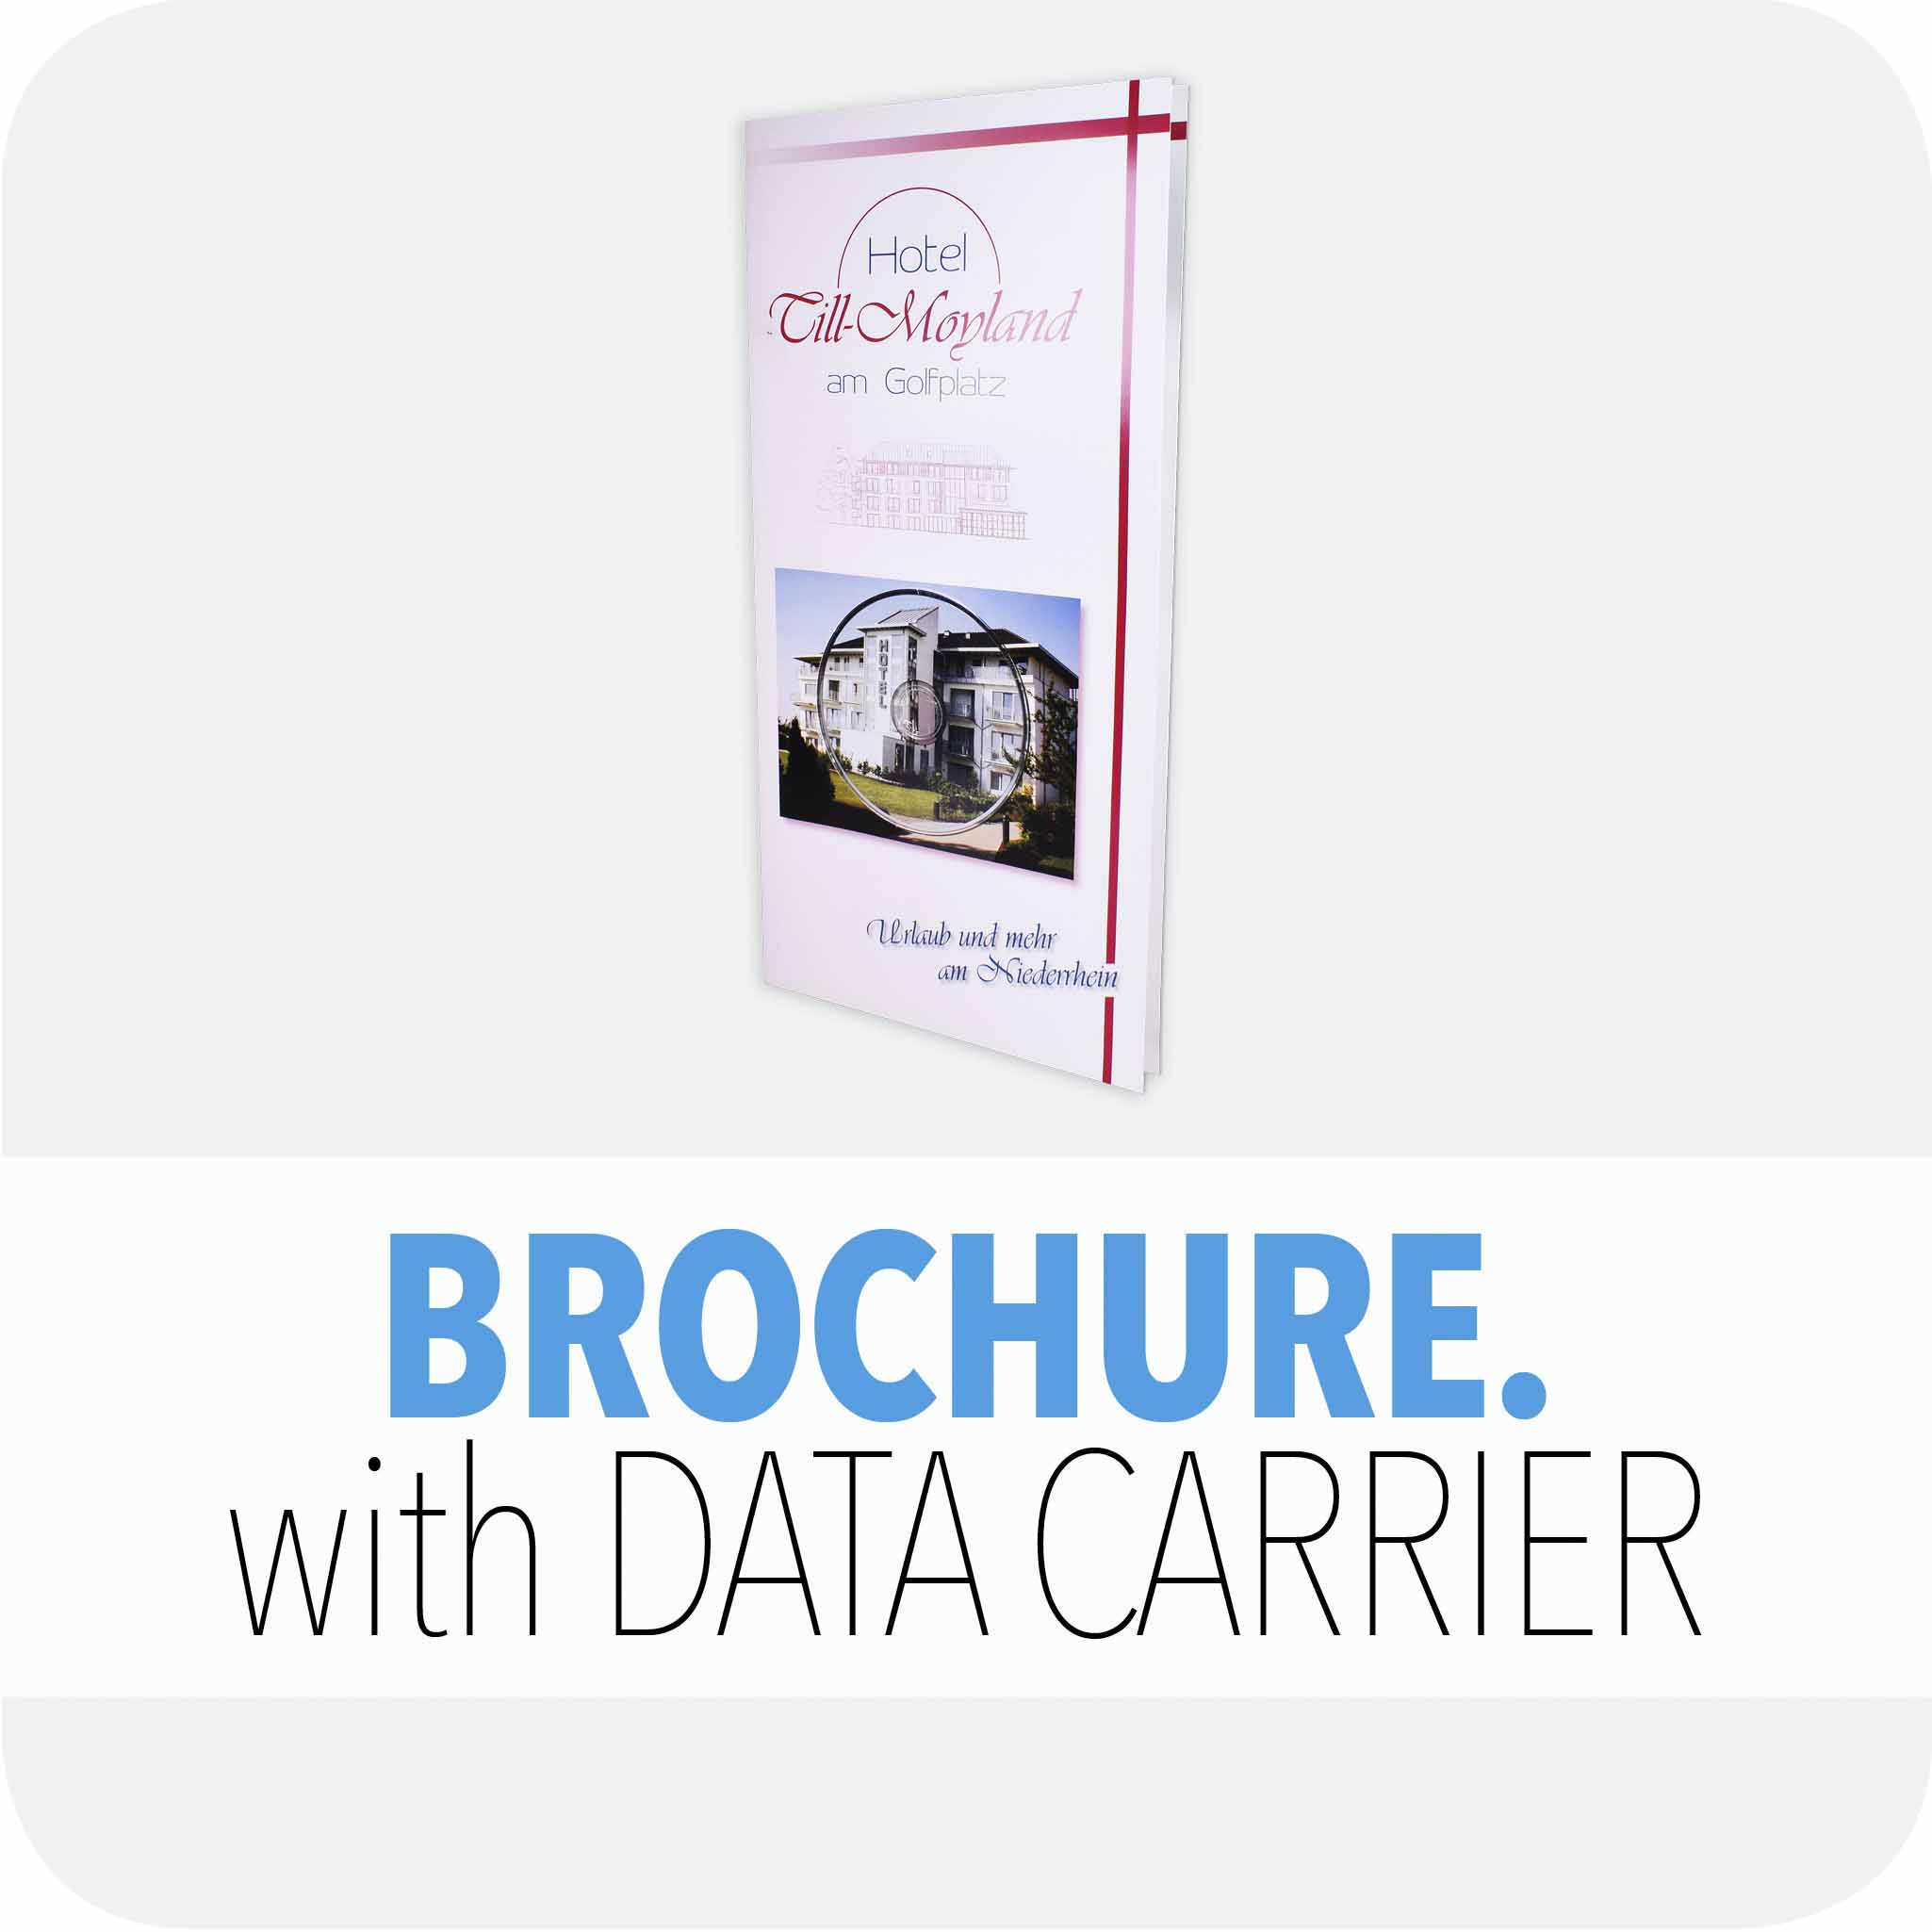 Brochure with data carrier